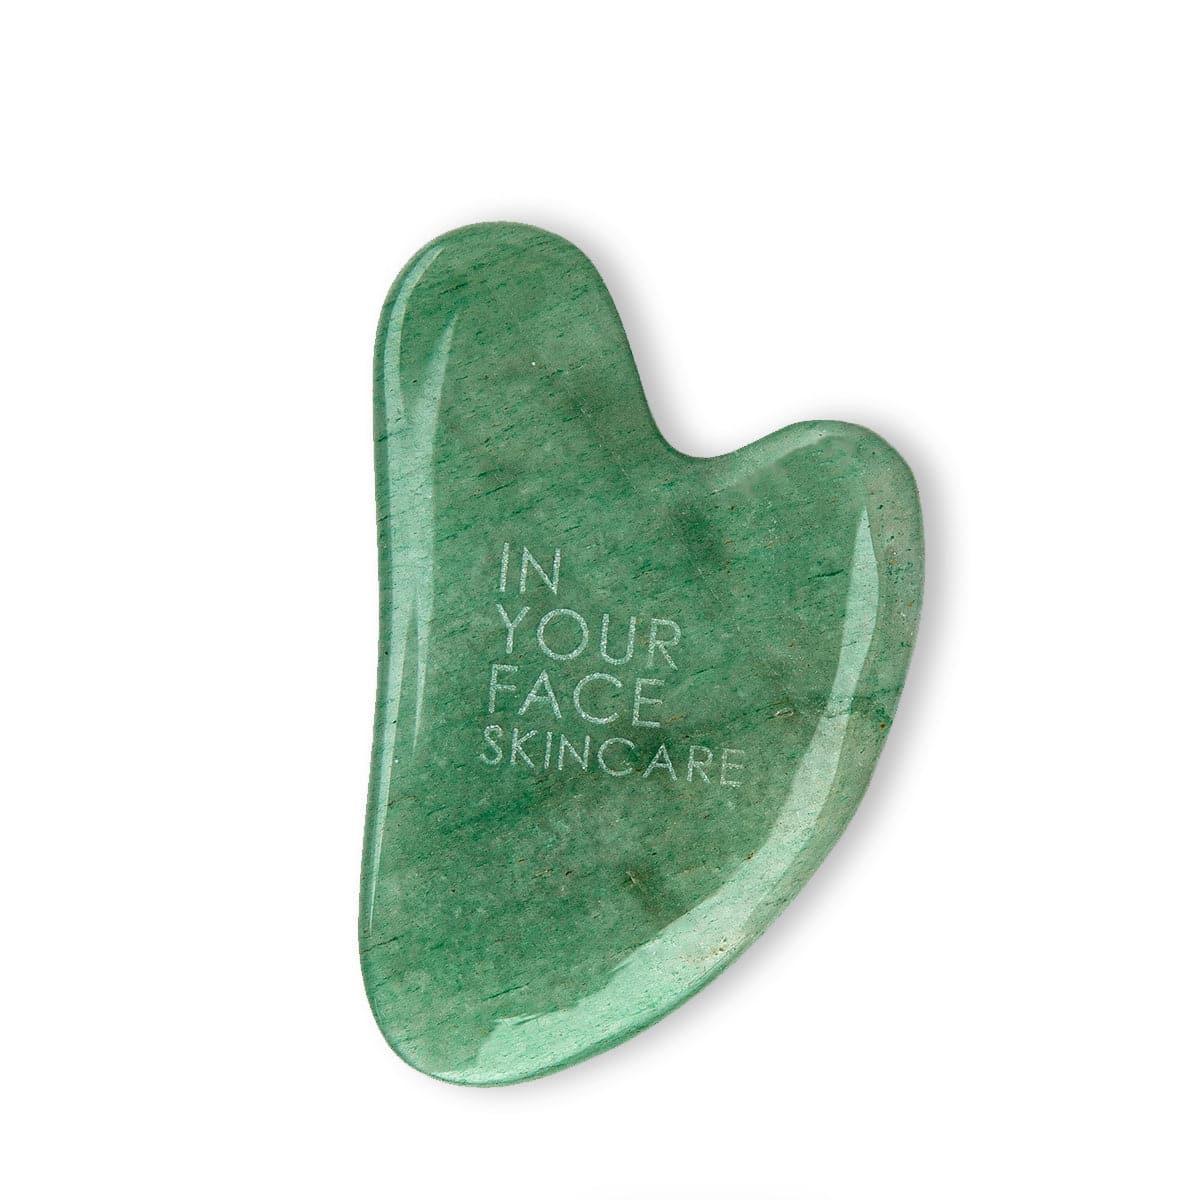 A clean photo of our IN YOUR FACE SKINCARE GUA SHA STONE on a white background. It is a medium green color with smooth round edges.